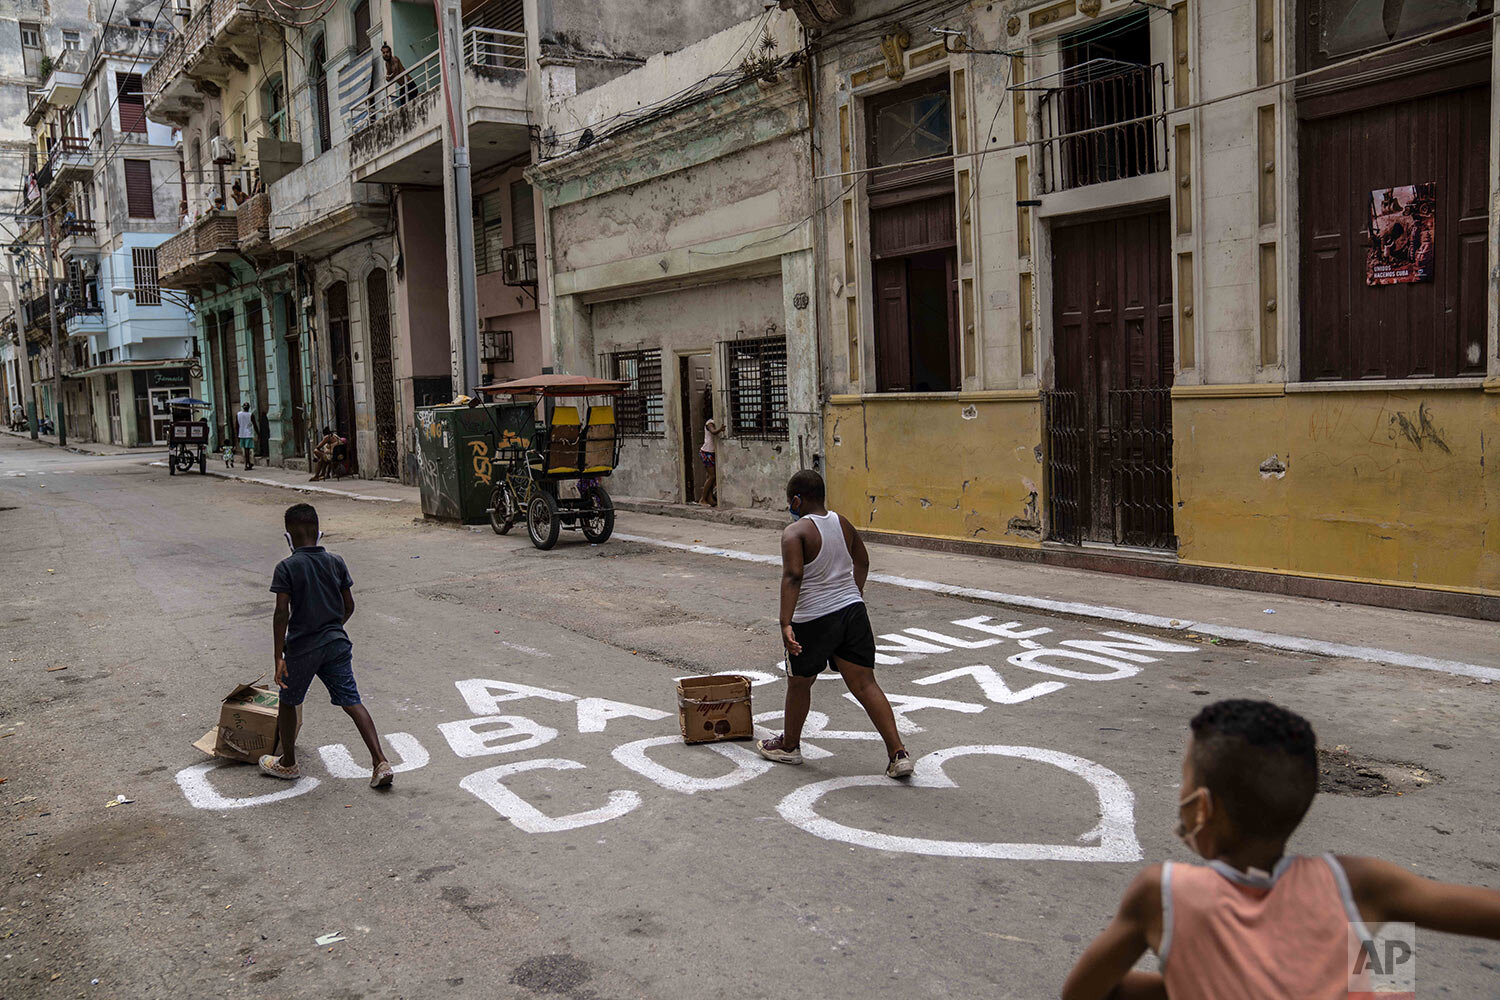  Children play on a street covered by the Spanish phrase “Put your heart into Cuba” in Havana, Cuba, Monday, July 26, 2021 (AP Photo/Eliana Aponte) 